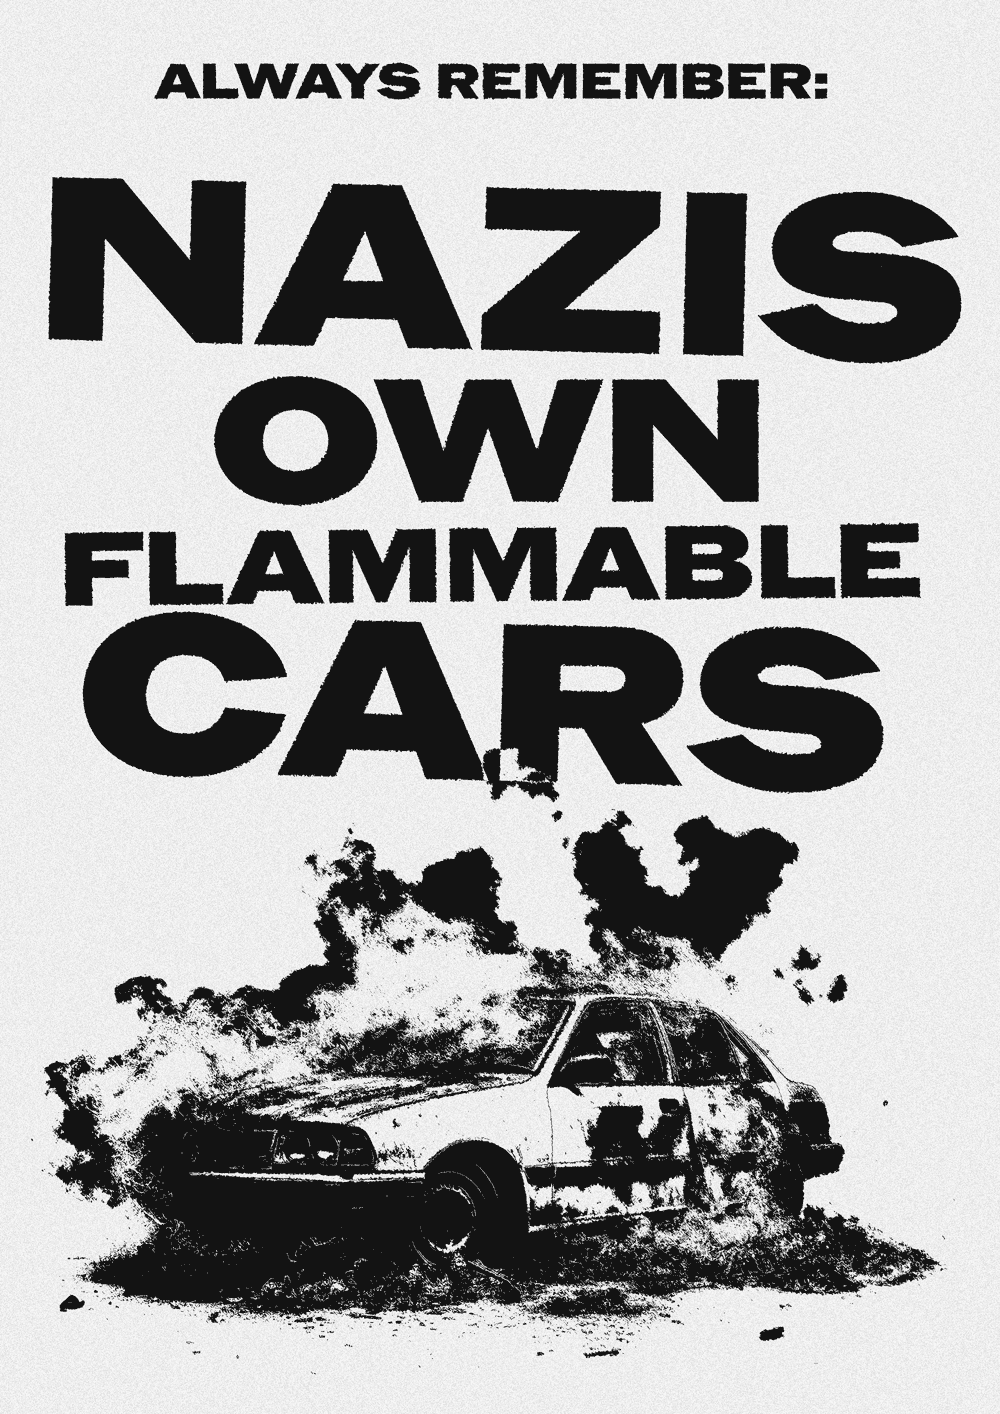 Nazis own flammable cars